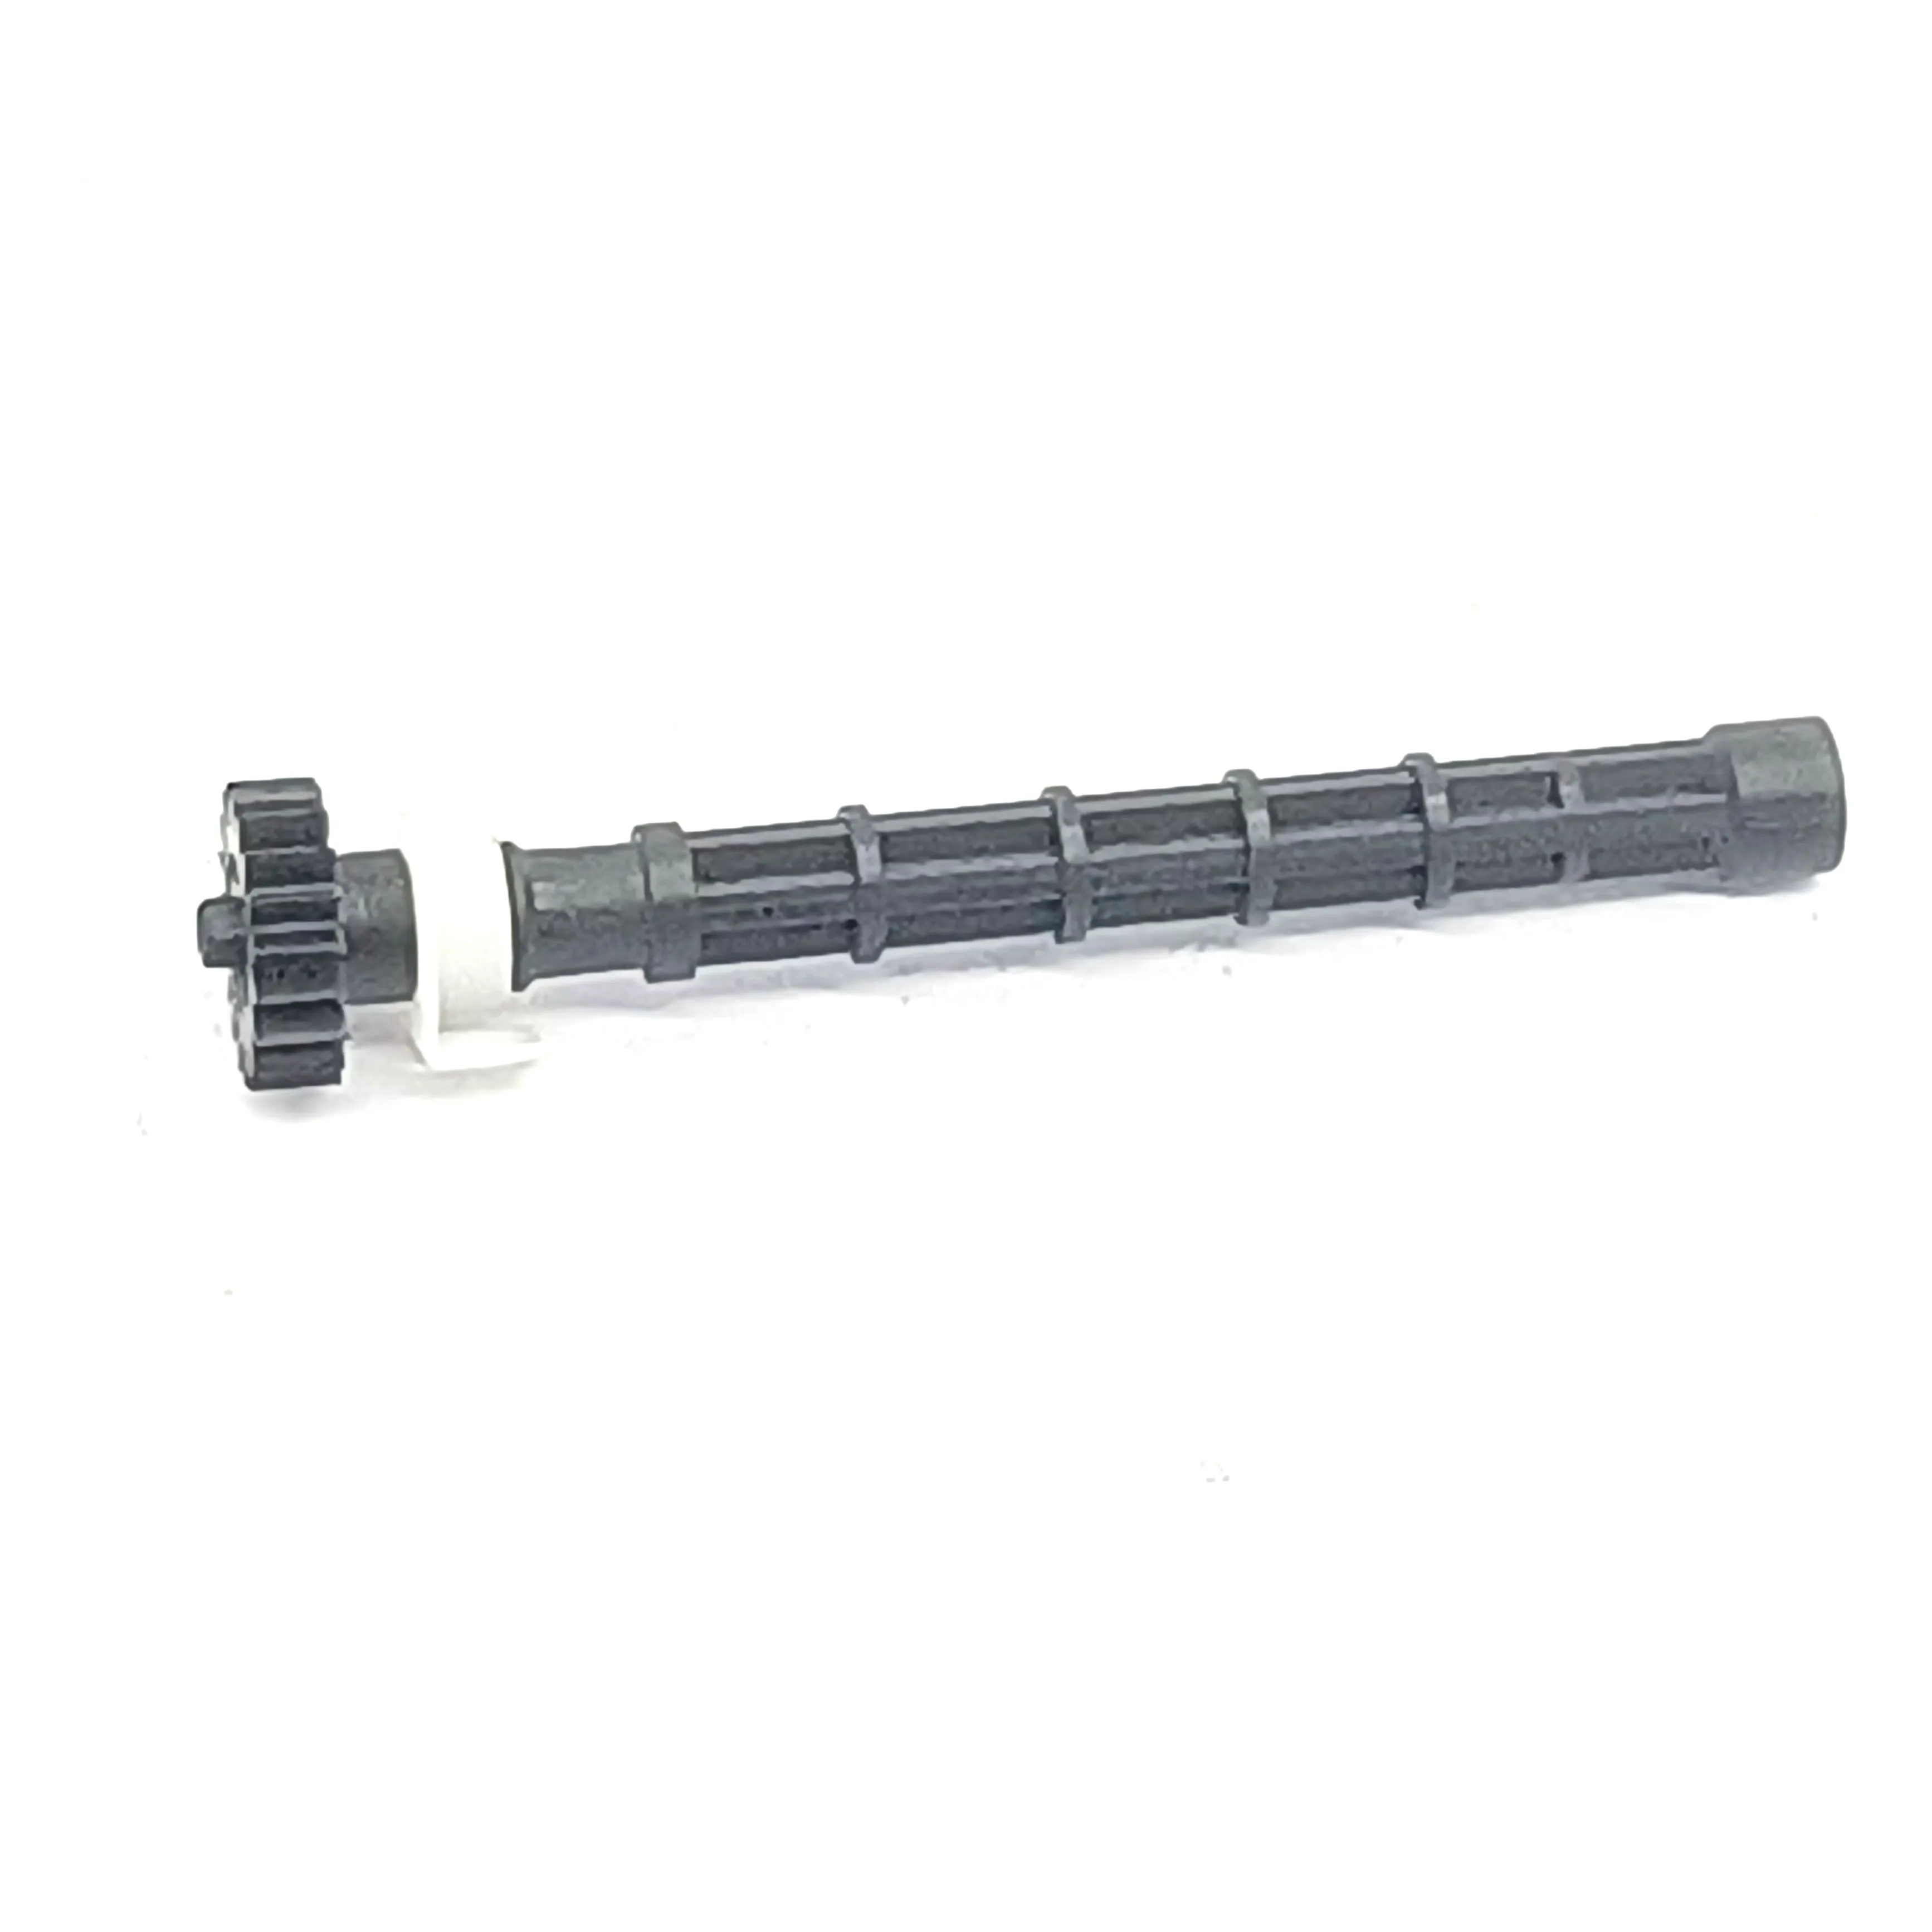 

Pickup Roller 8720 Fits For HP 8745 7710 8216 8710 8700 8730 7740 8725 7720 8702 8210 8720 8715 8740 8728